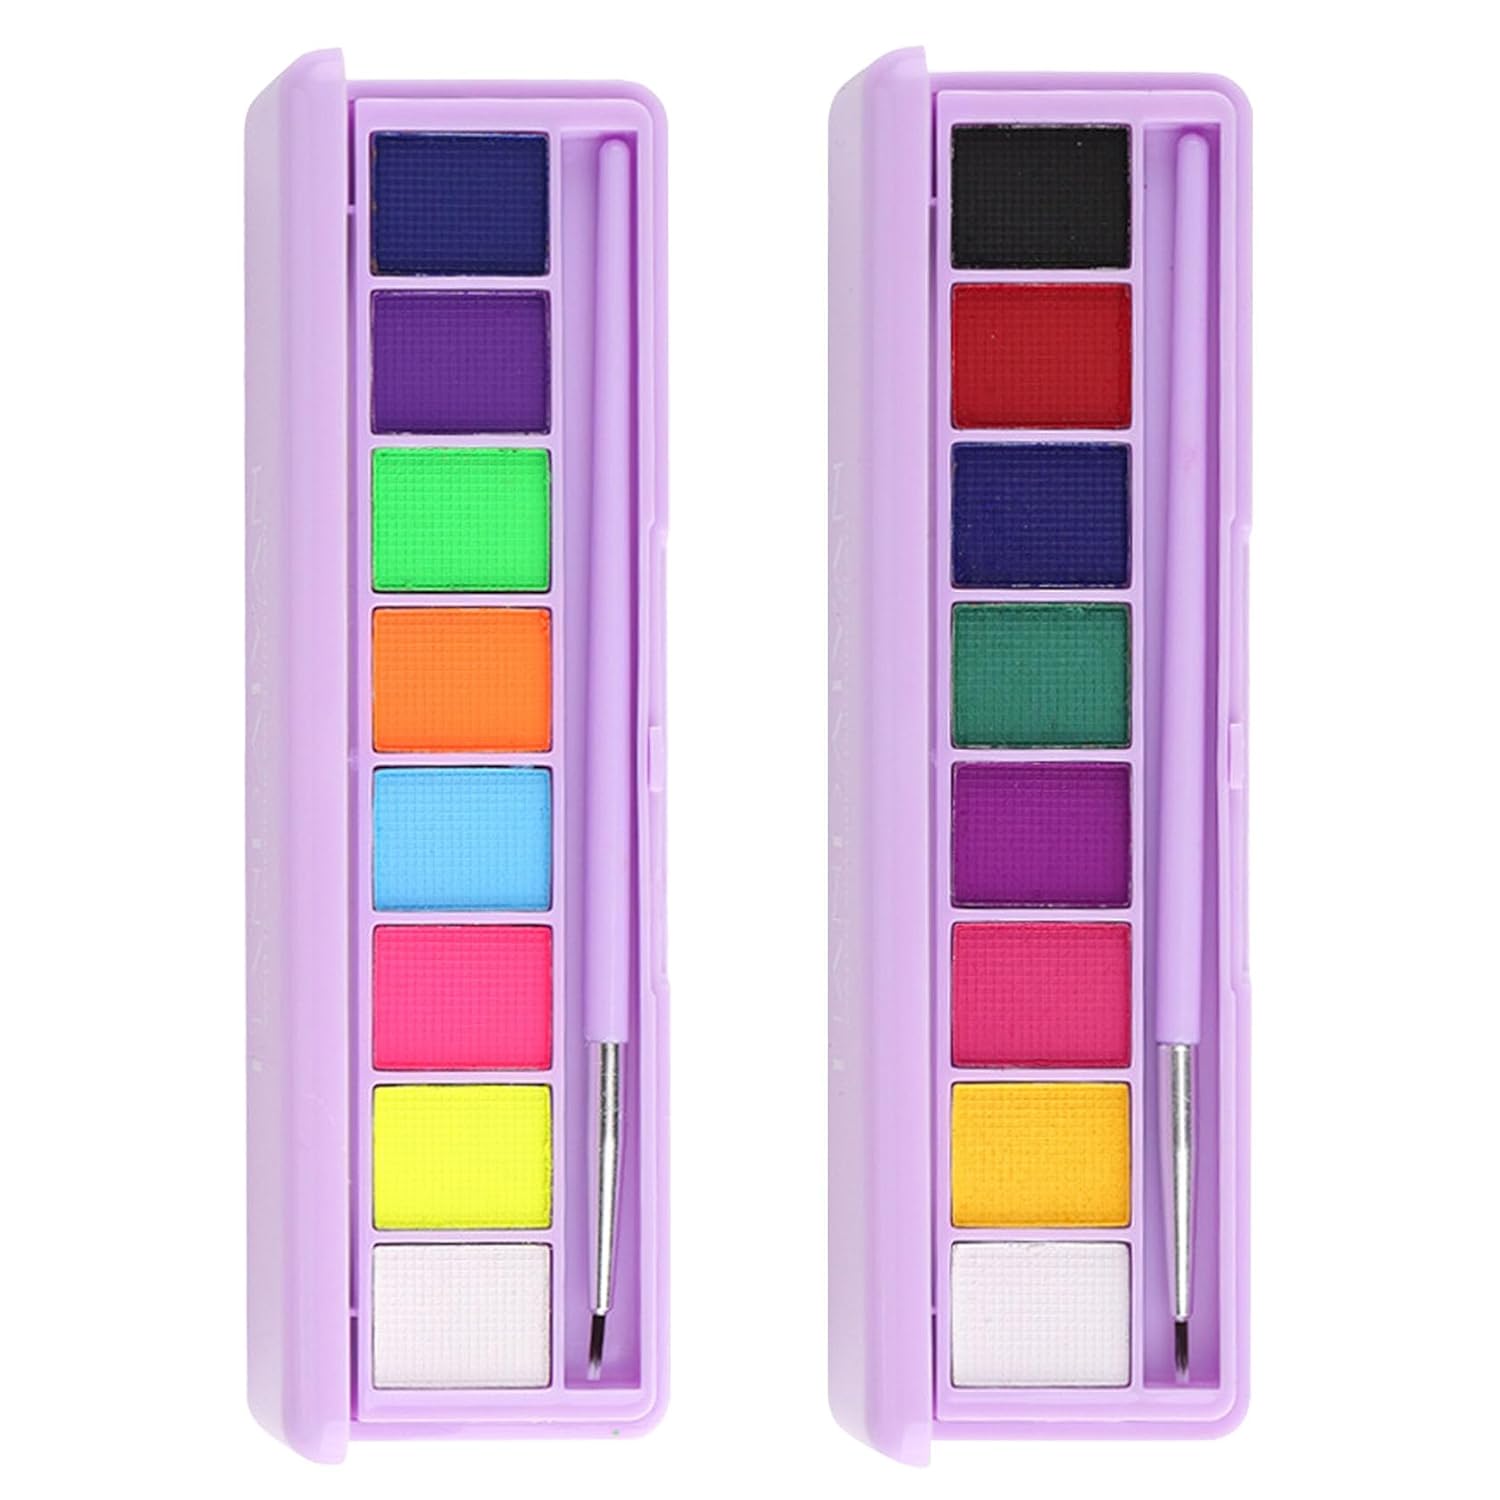 NVLEPTAP Water Activated Eyeliner Palette Liquid Eyeliner Colorful Set,Neon Rainbow Colorful Face Body Paint Colored Eyeliners,UV Glow In The Dark Eyeliner - 01+02